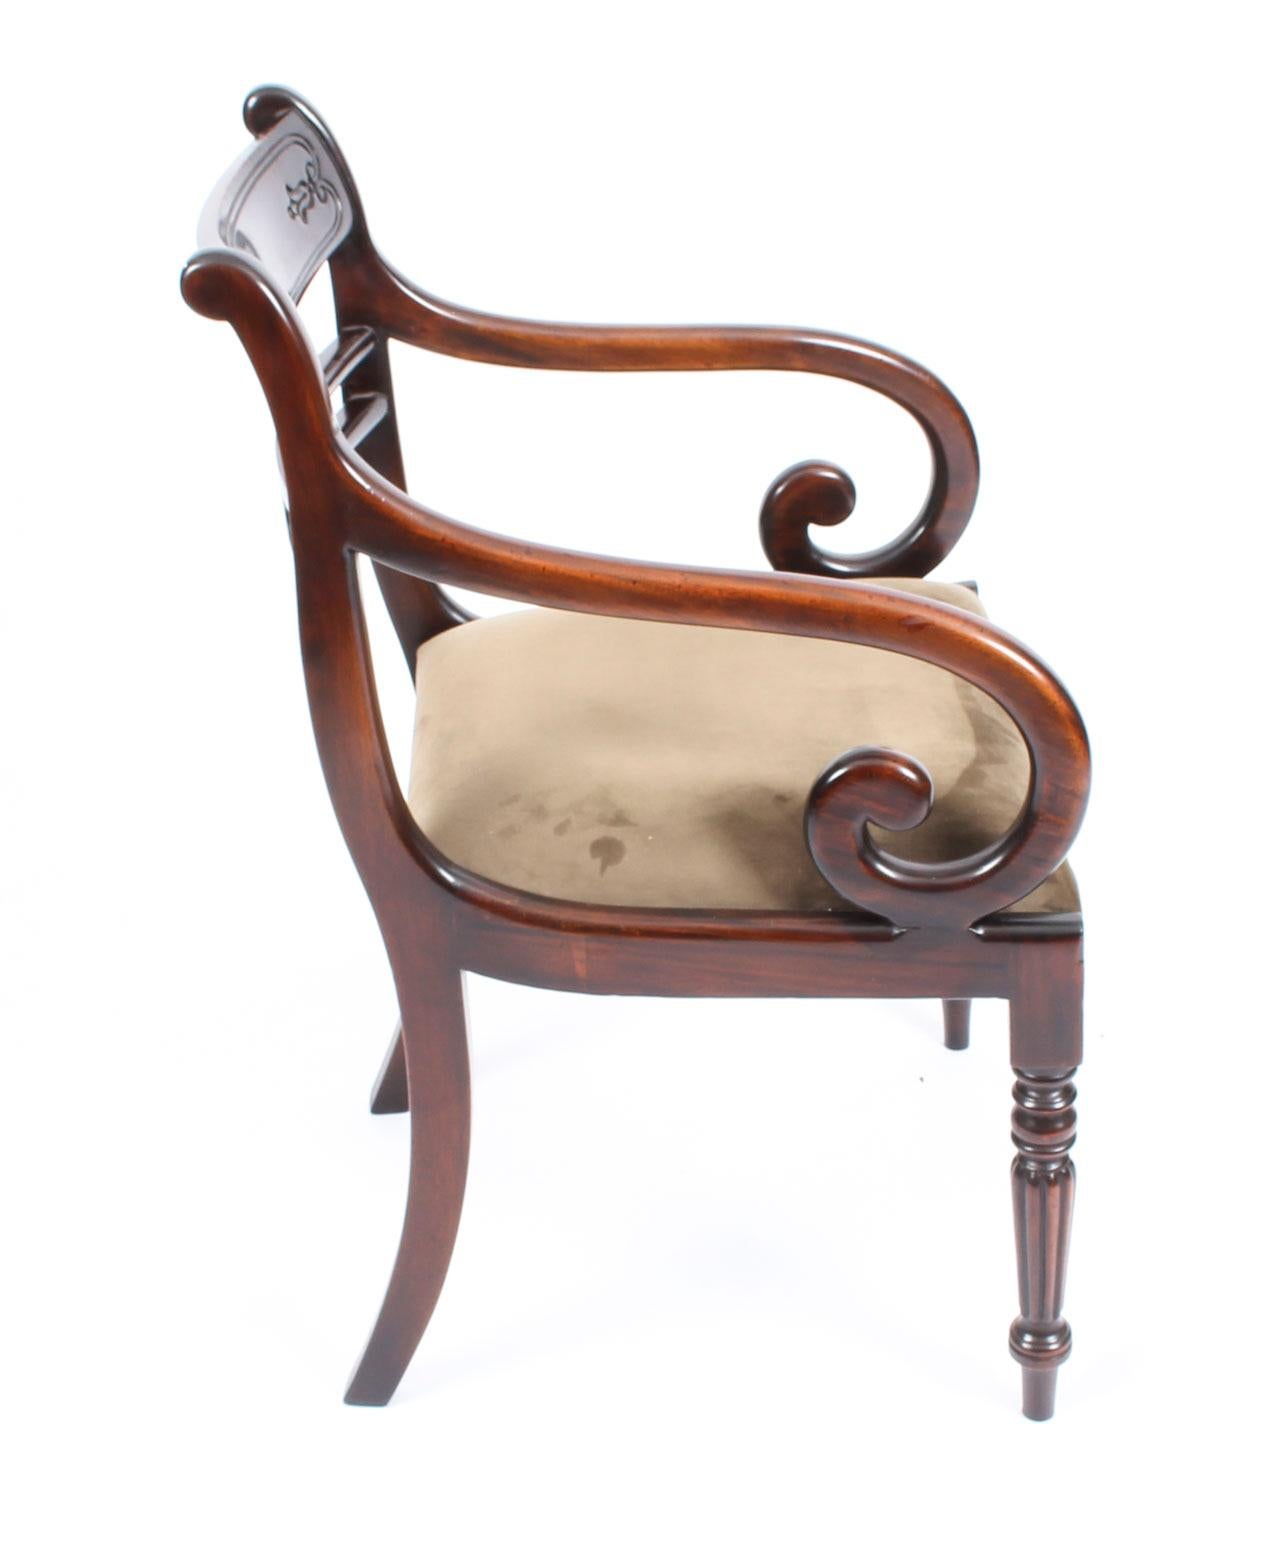 An absolutely fantastic English made pair of Regency style armchairs, dating from the last quarter of the 20th century.

These chairs have been masterfully crafted in beautiful solid flame mahogany throughout and the finish and attention to detail